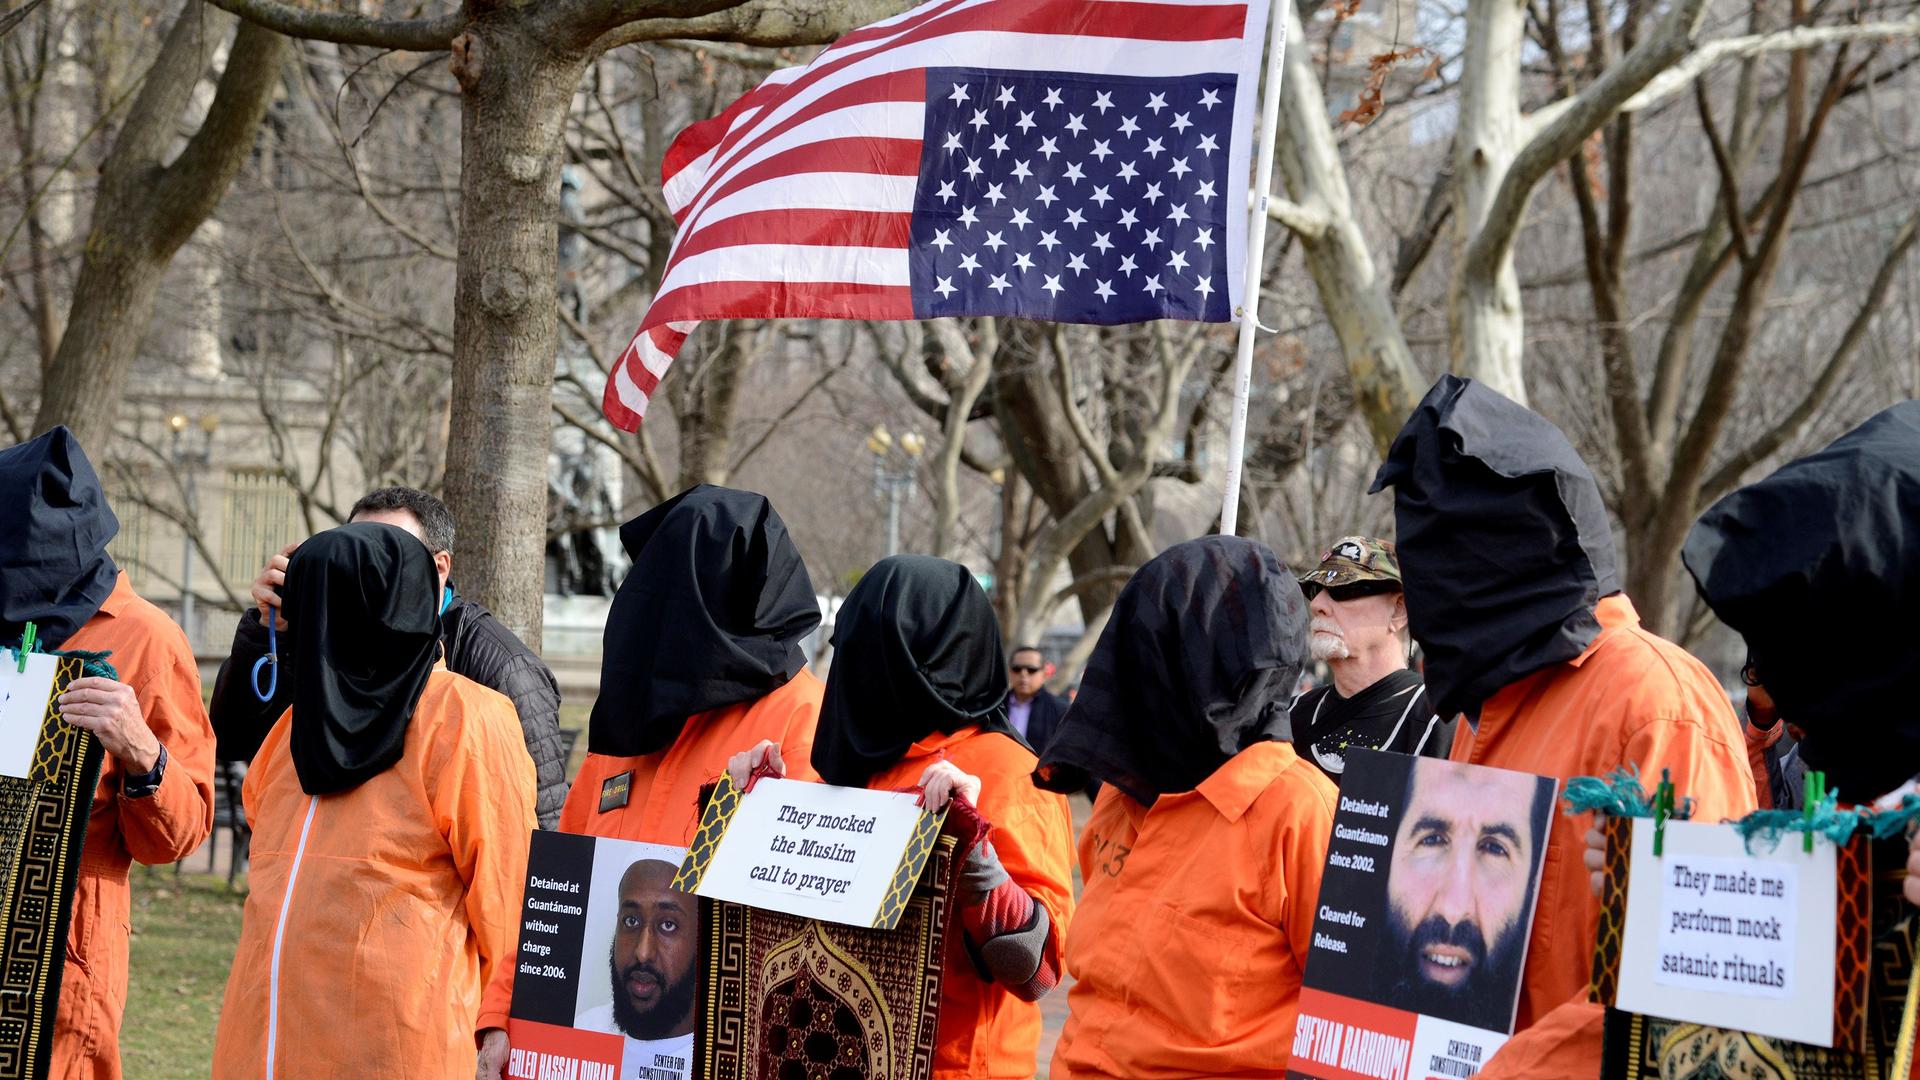 Protesters wear orange suits and black cloth over their heads with an upside down US flag behind them